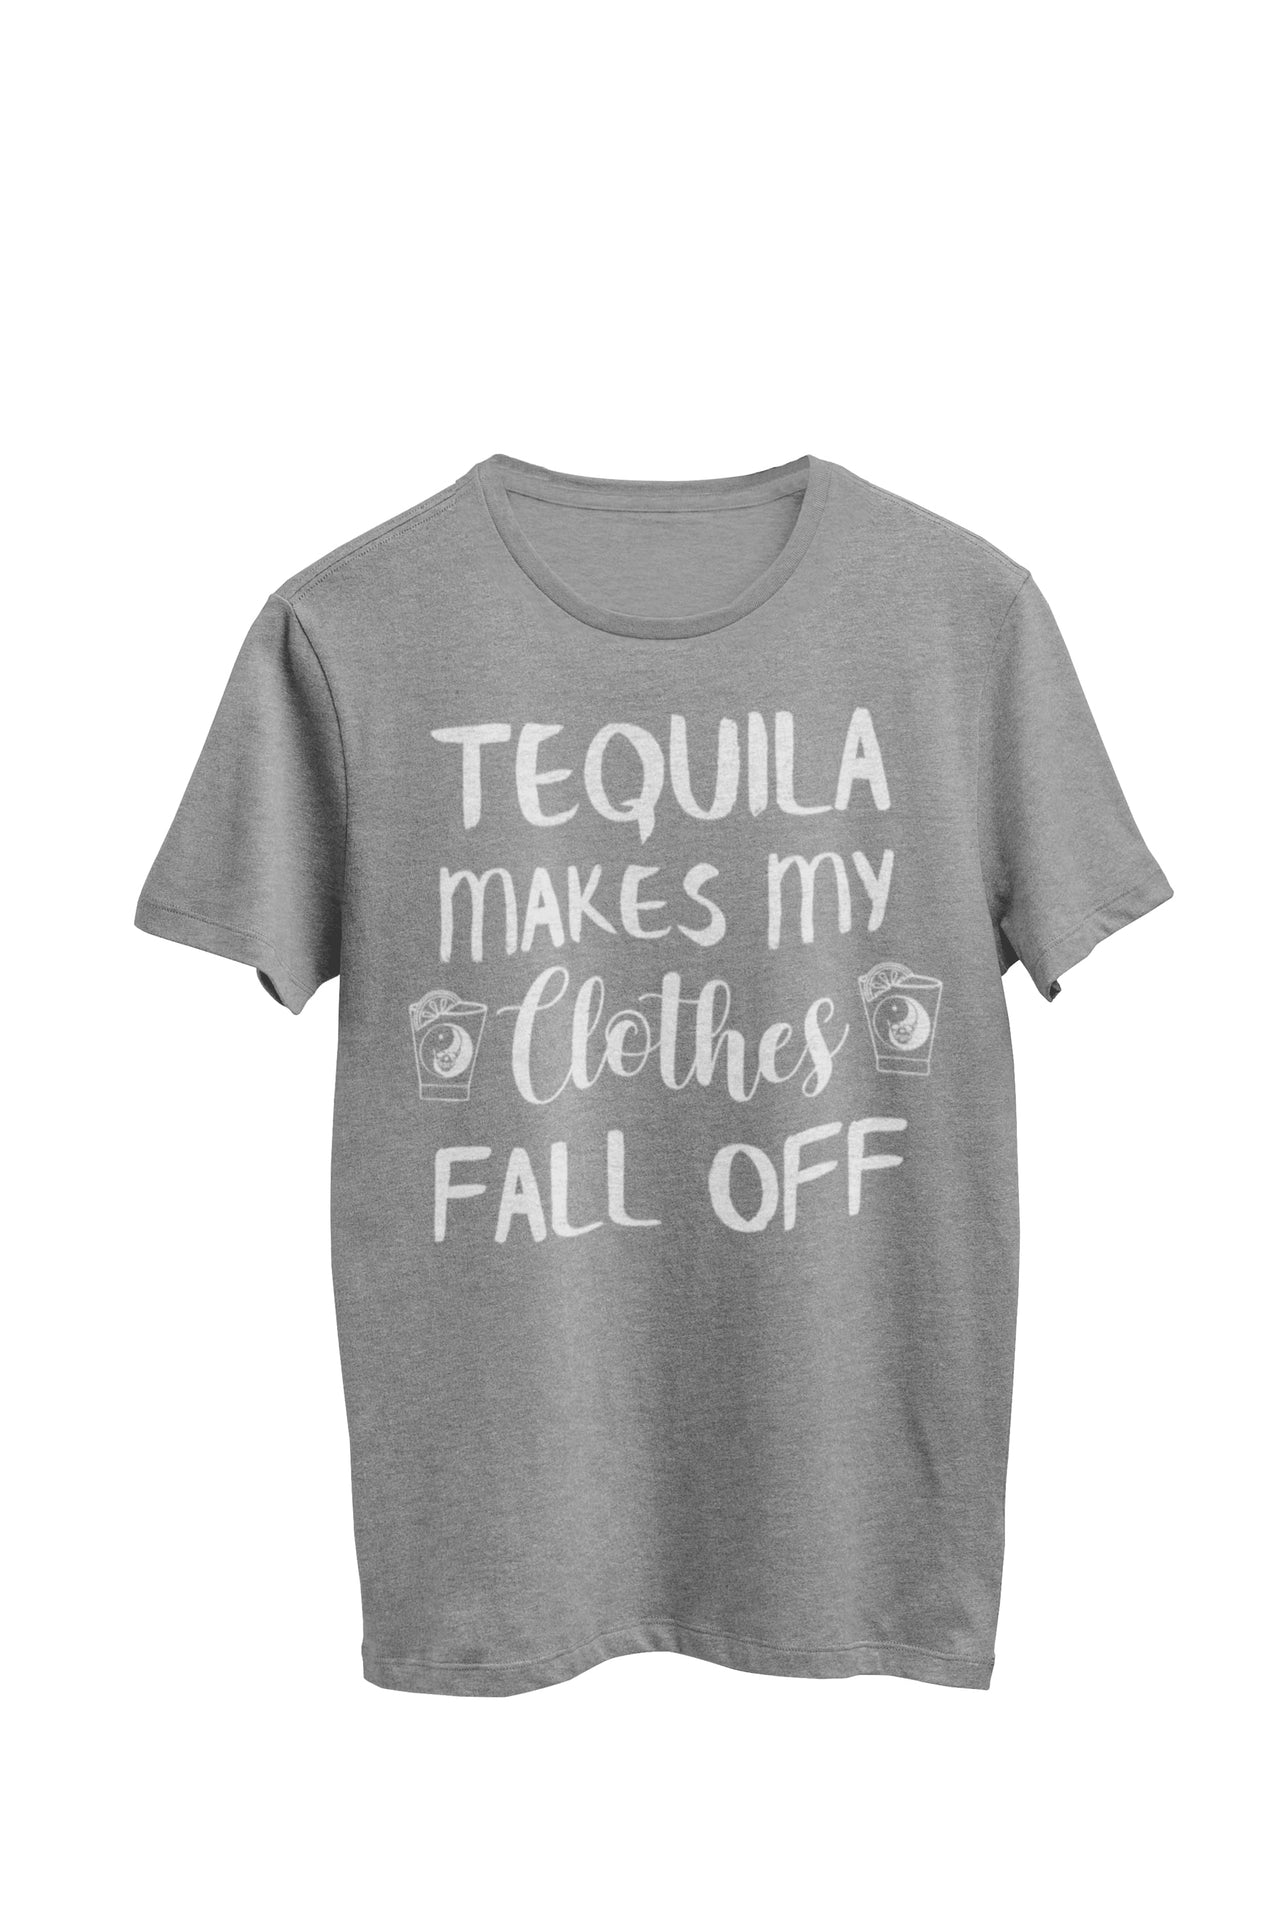 Heather Gray Unisex T-shirt featuring the text 'Tequila makes my clothes fall off,' accompanied by an image of a shot glass with a yin yang symbol on each side of the words. Designed by WooHoo Apparel.